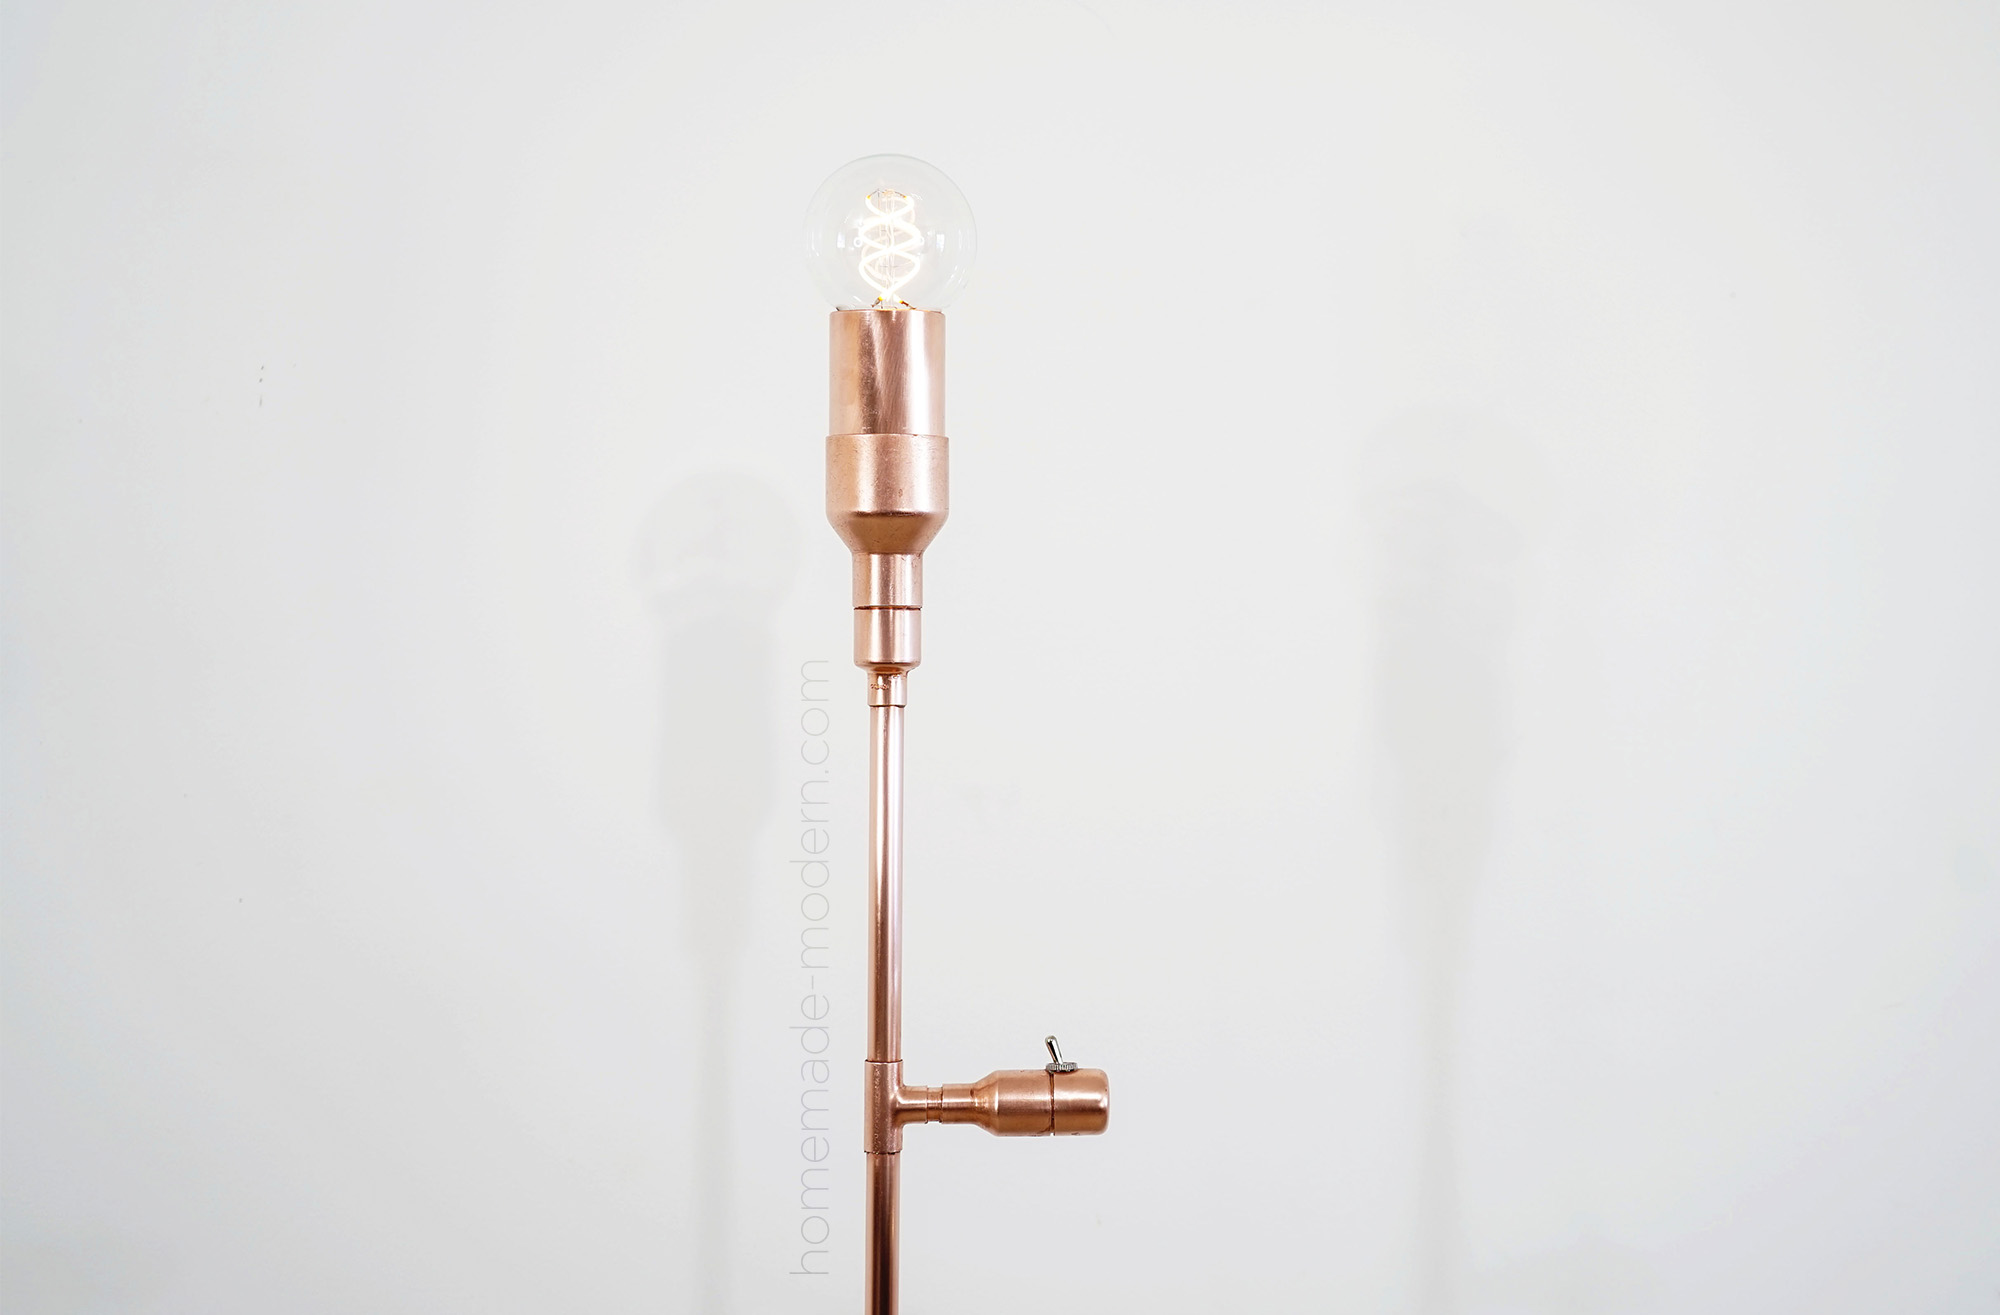 This DIY copper lamp was made out of copper pipes from Home Depot. For more information go to HomeMade-Modern.com